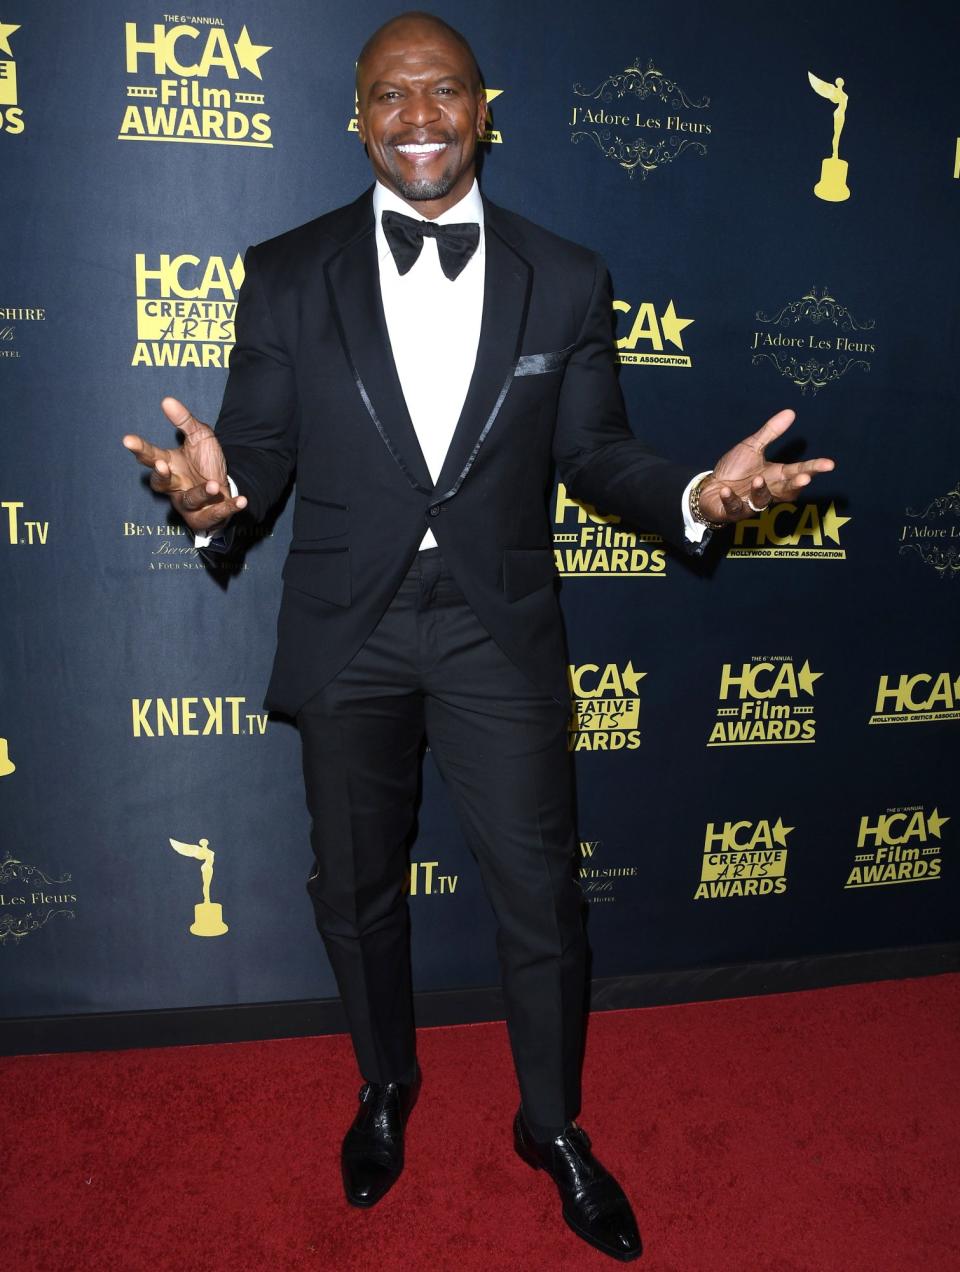 <p>Terry Crews arrives at the Hollywood Critics Association's 2023 HCA Film Awards at the Beverly Wilshire, A Four Seasons Hotel on Feb. 24 in Beverly Hills.</p>